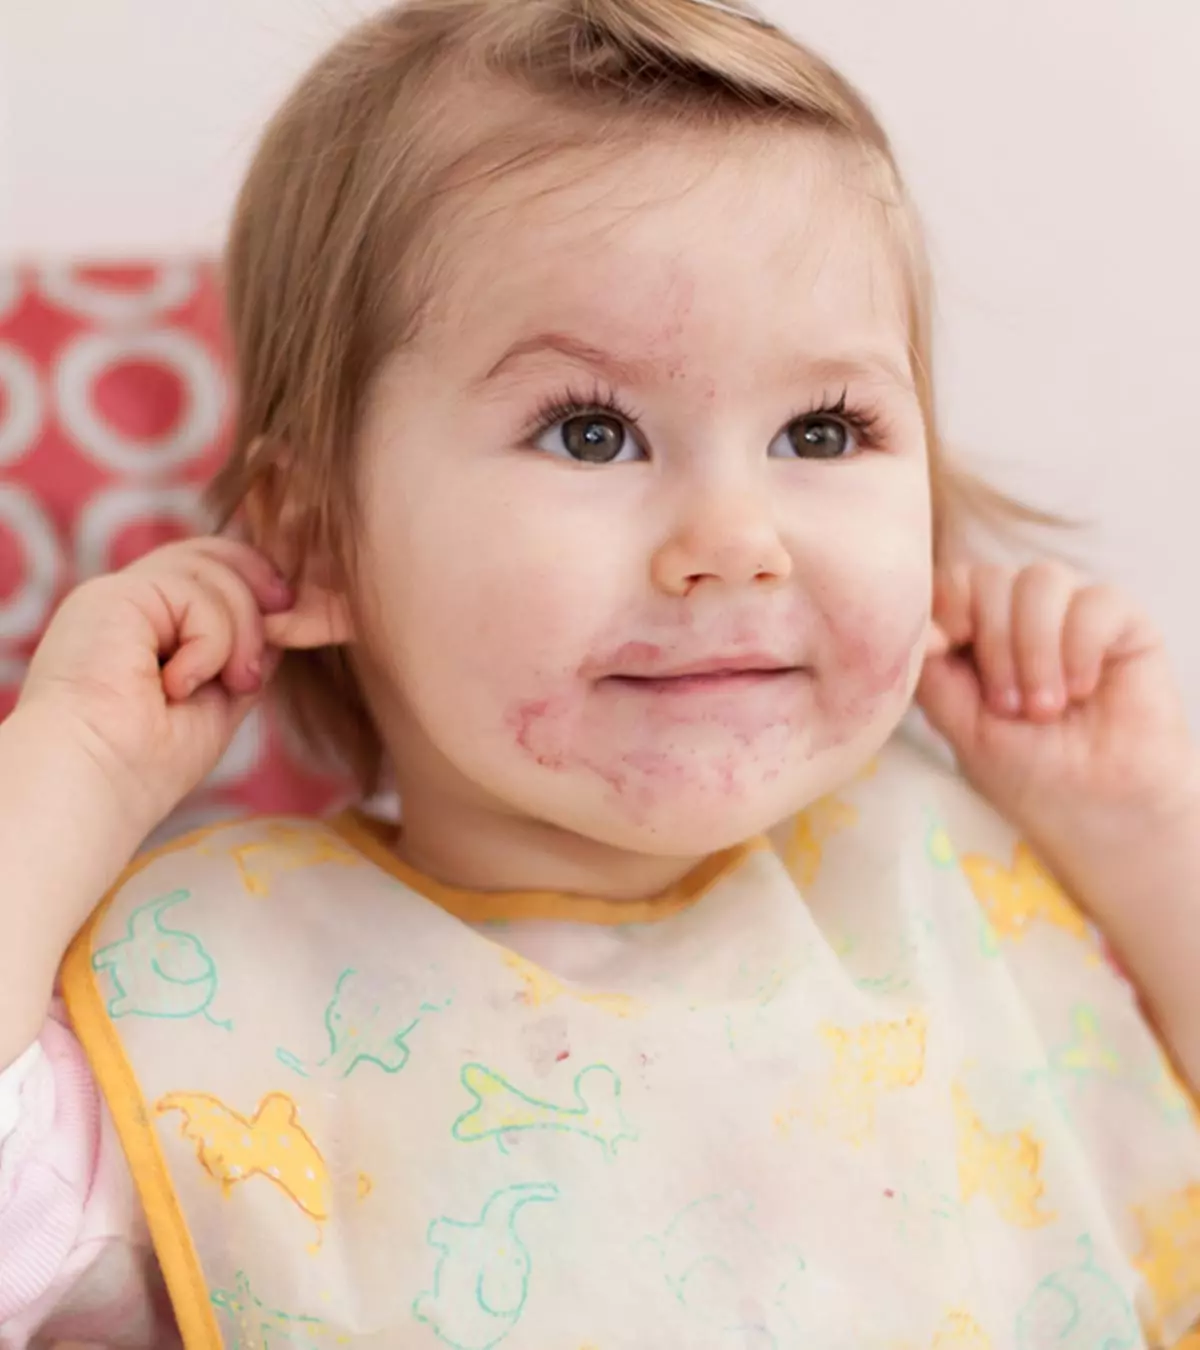 4 Reasons Why The Baby's Pulling Ears And When To Worry